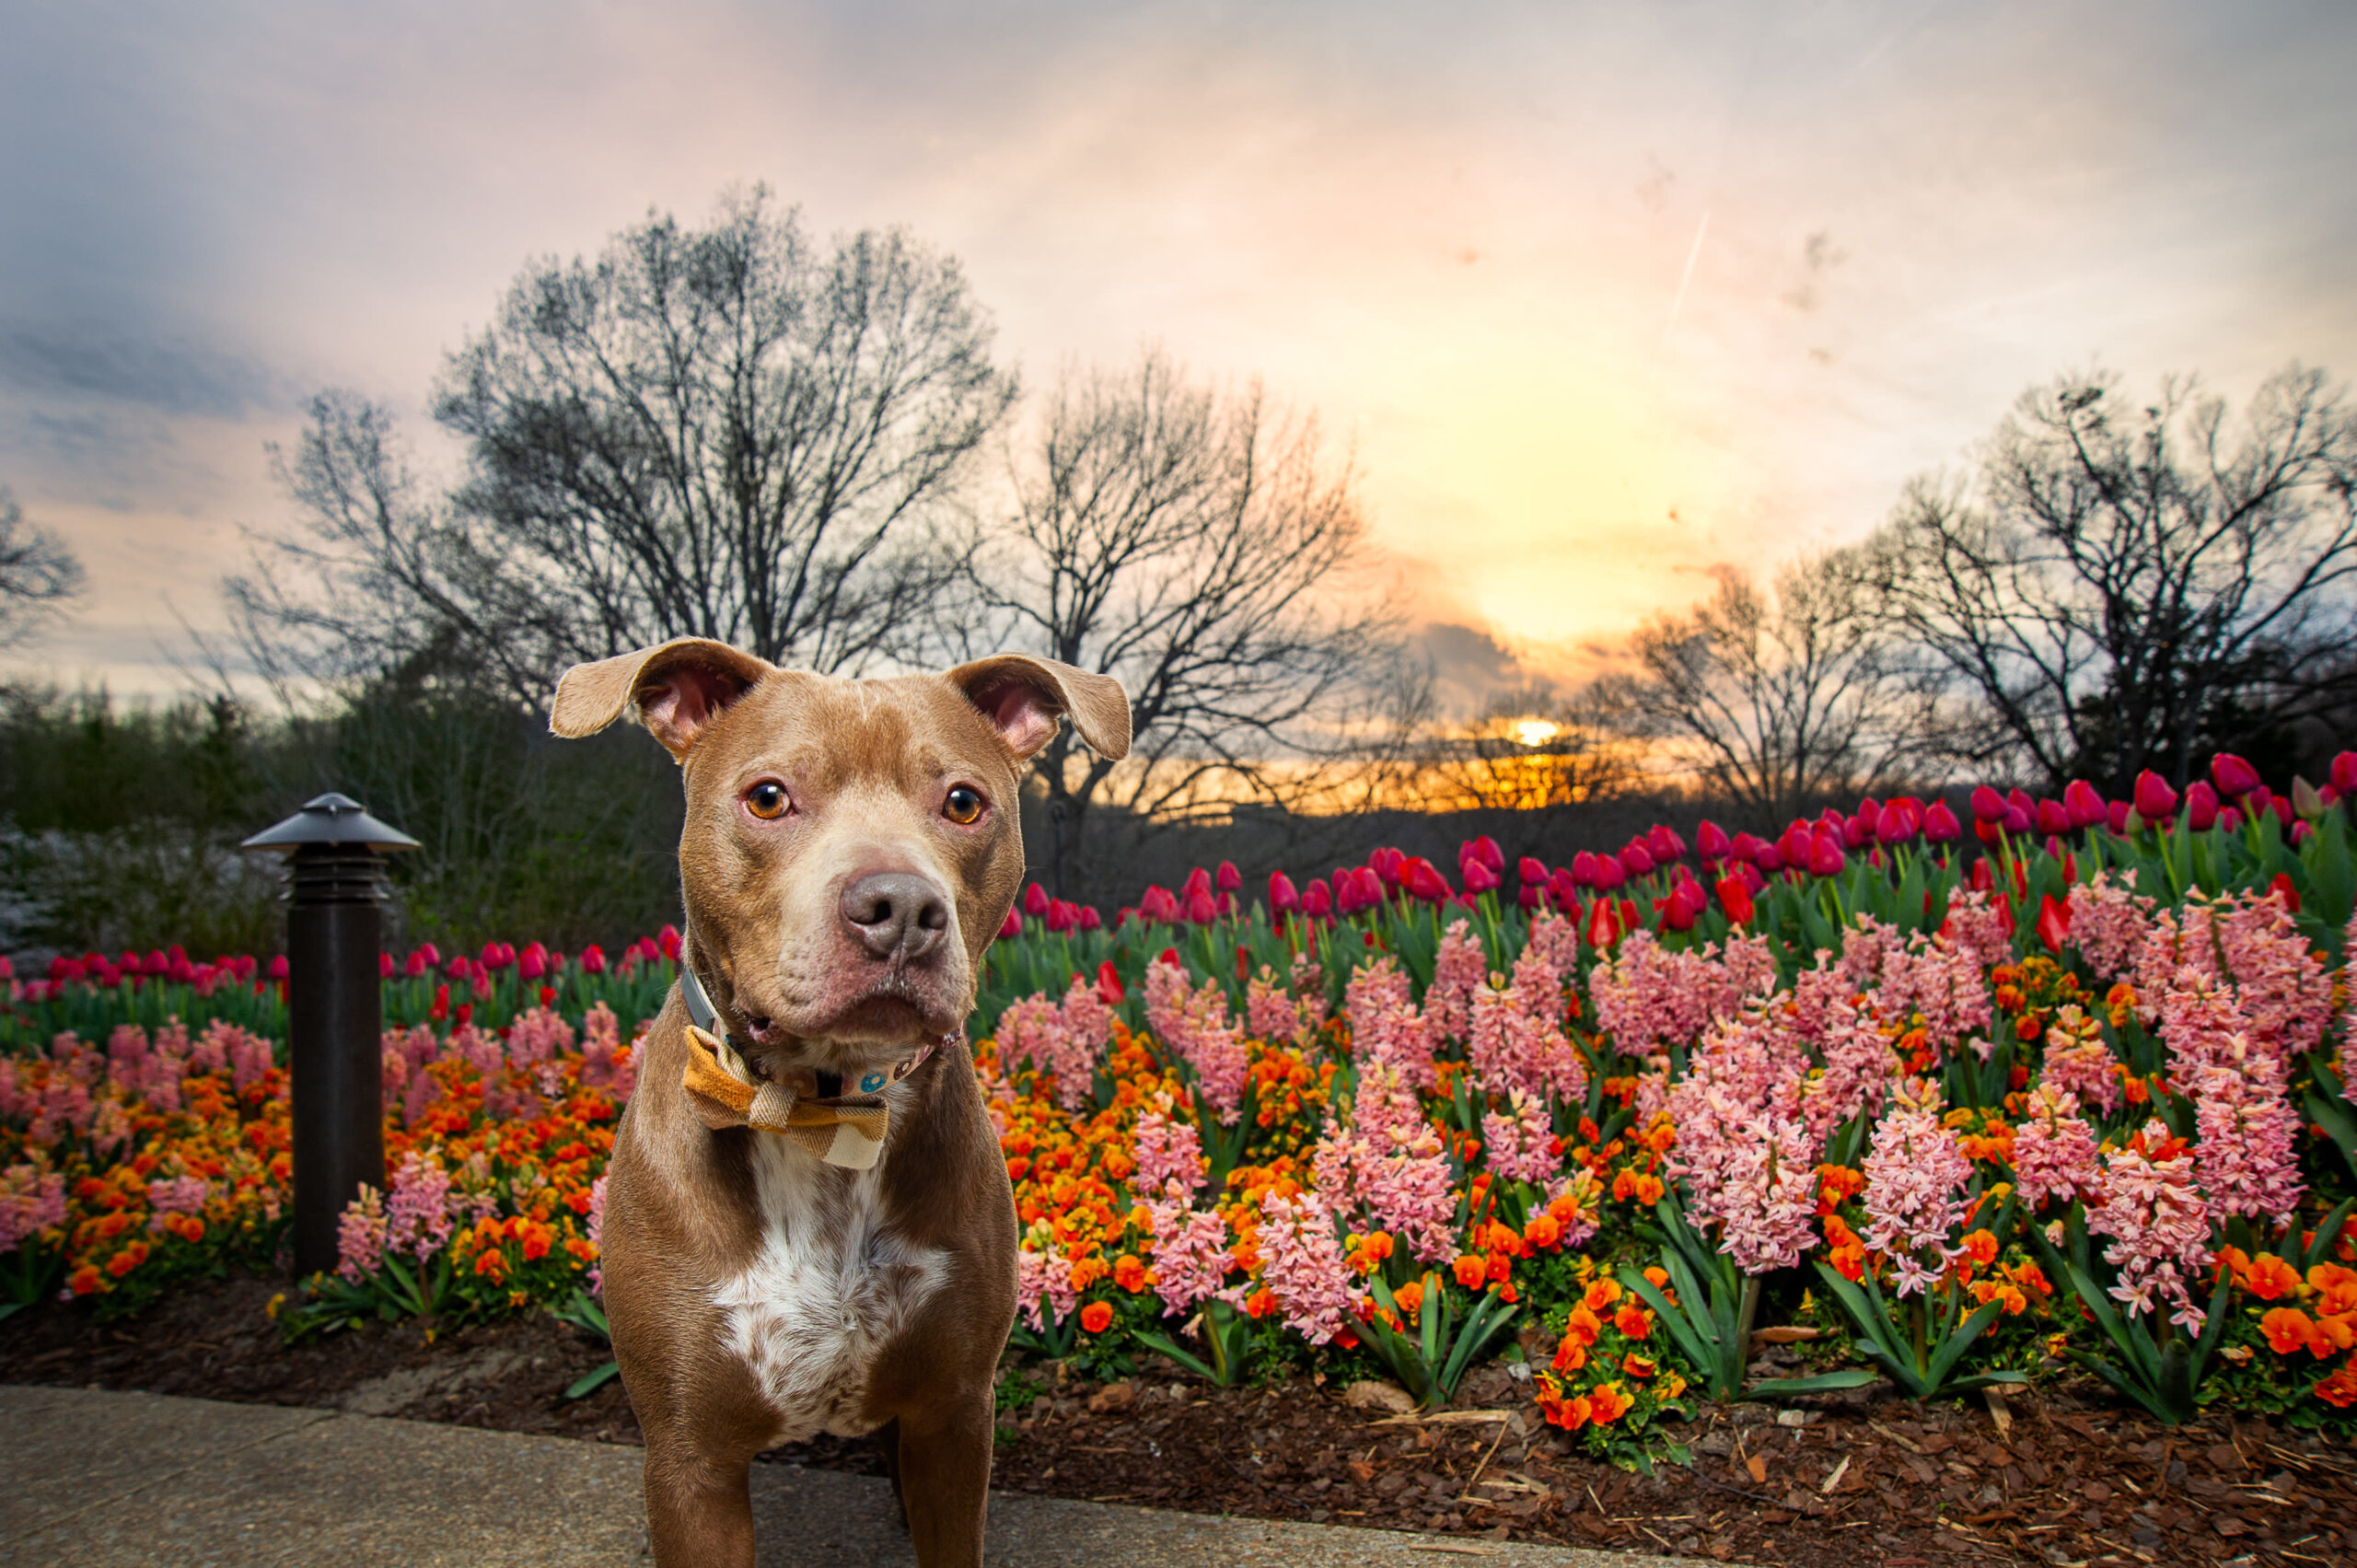 Dogs and dogwoods - Doggo in a field of flowers at Cheekwood